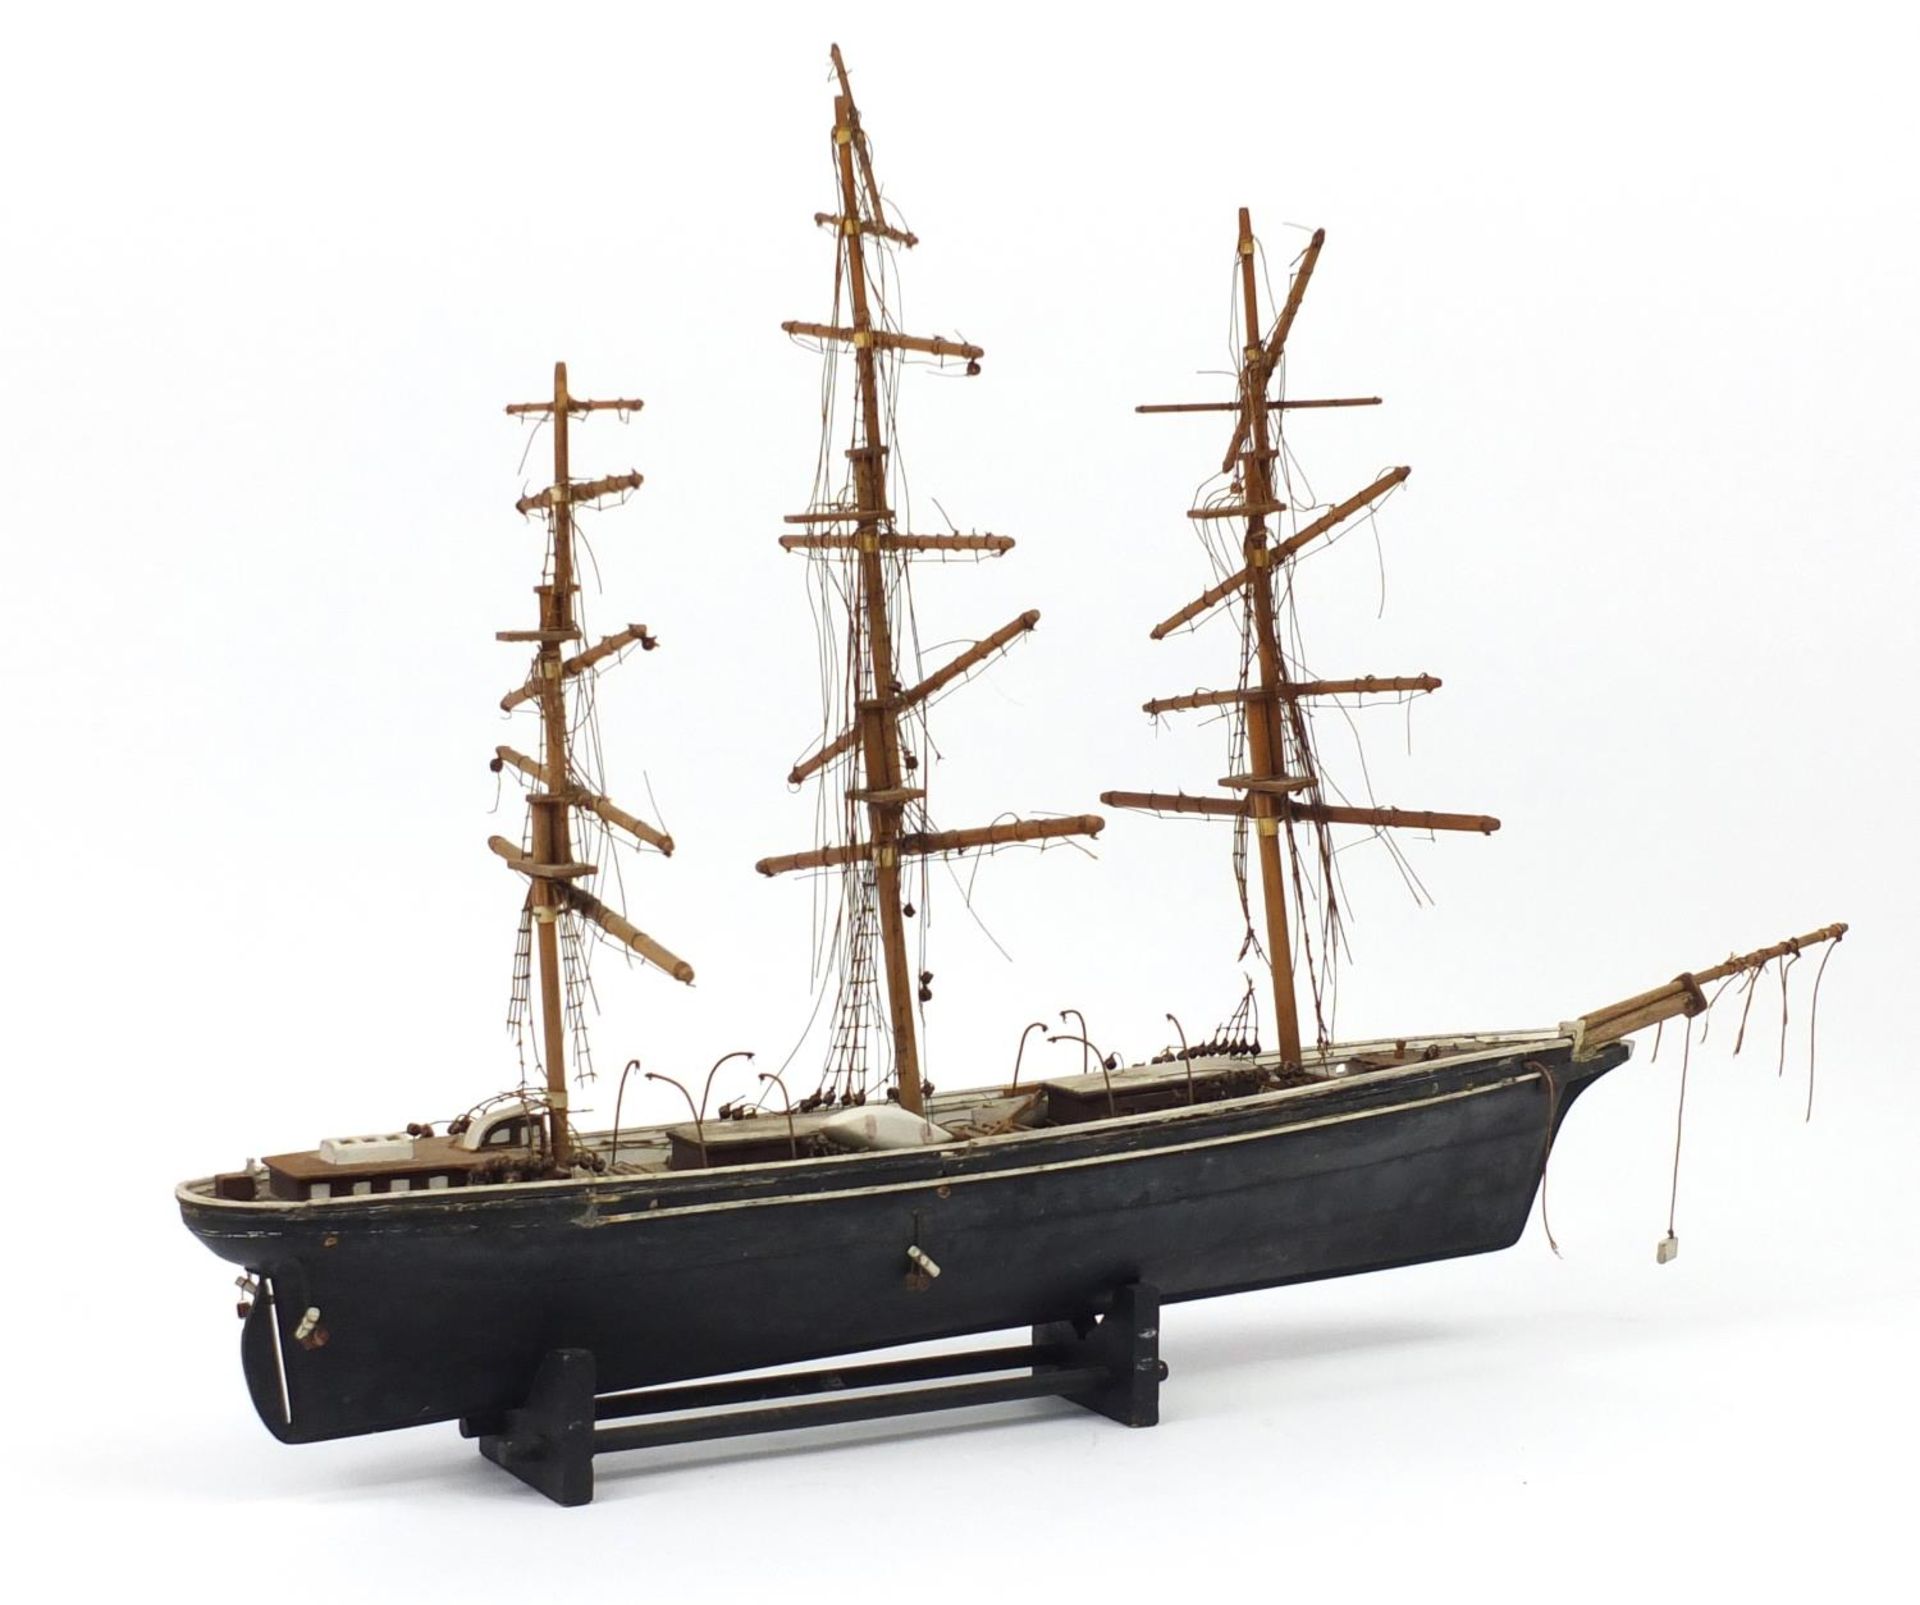 Hand painted wooden model of a rigged sailing ship, 73cm in length - Image 2 of 3